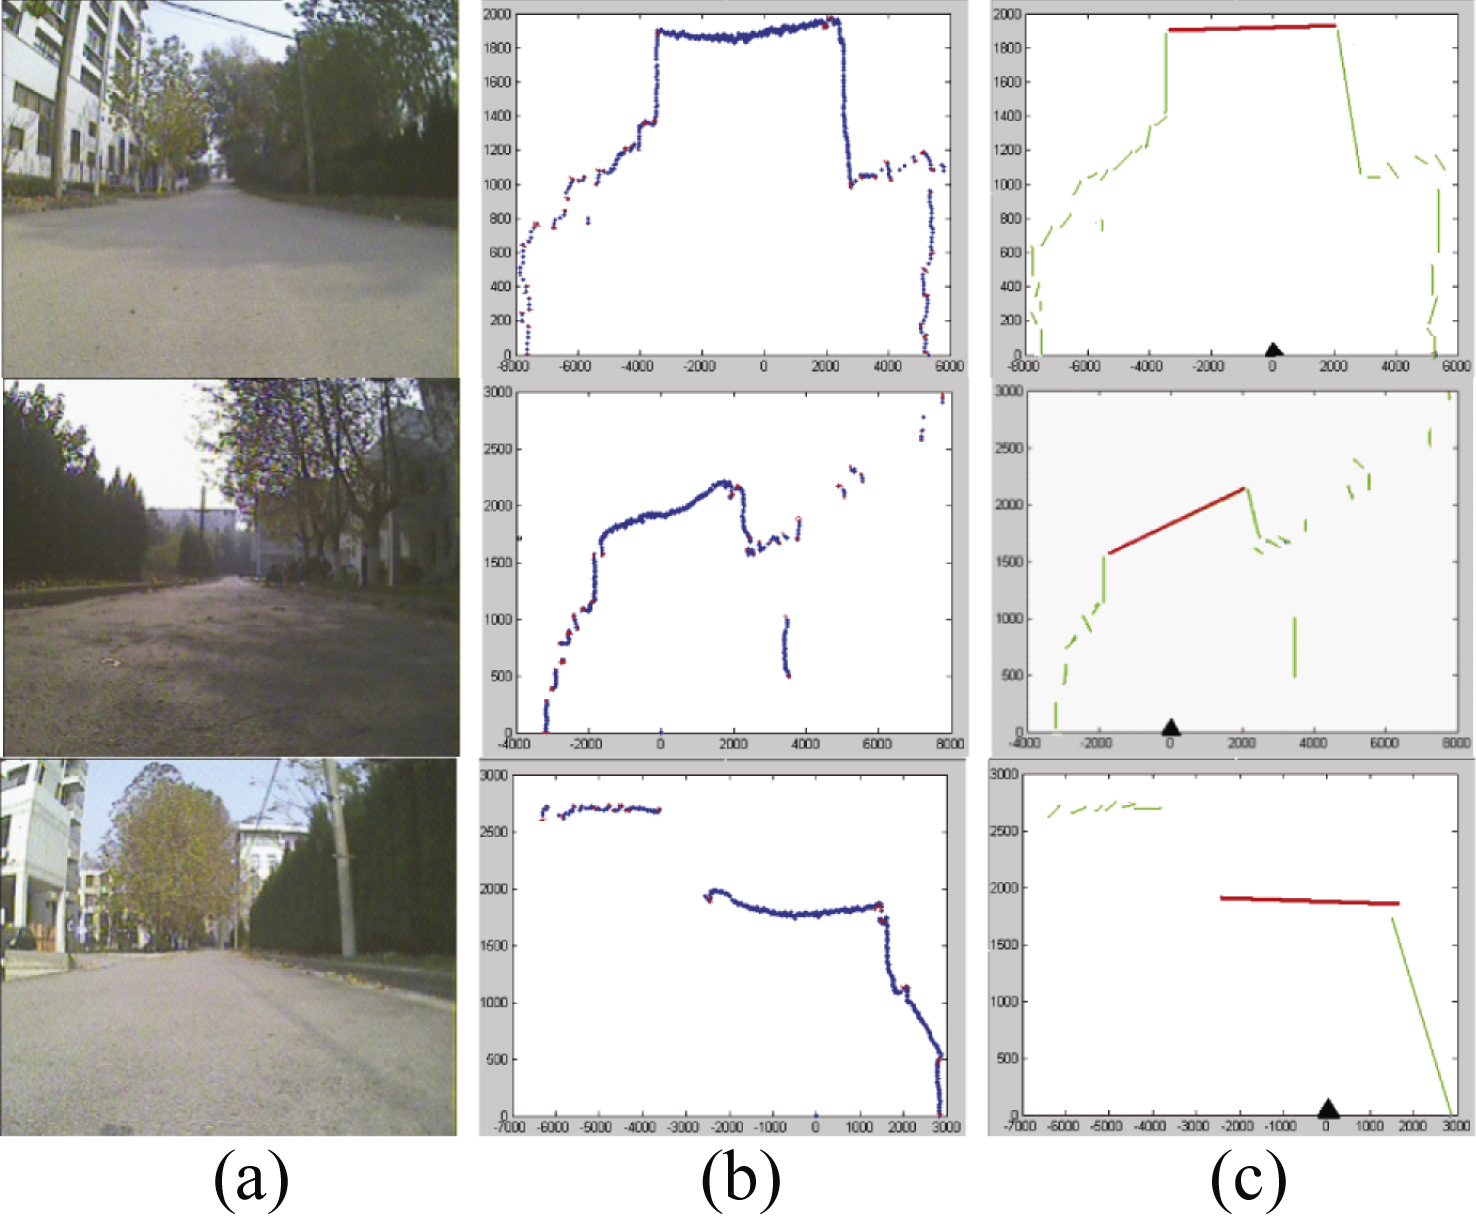 Road detection in laser points, (a) original scenes, (b) points clustering with red points are start or end point of a cluster, (c) results of road detection shown in red line.